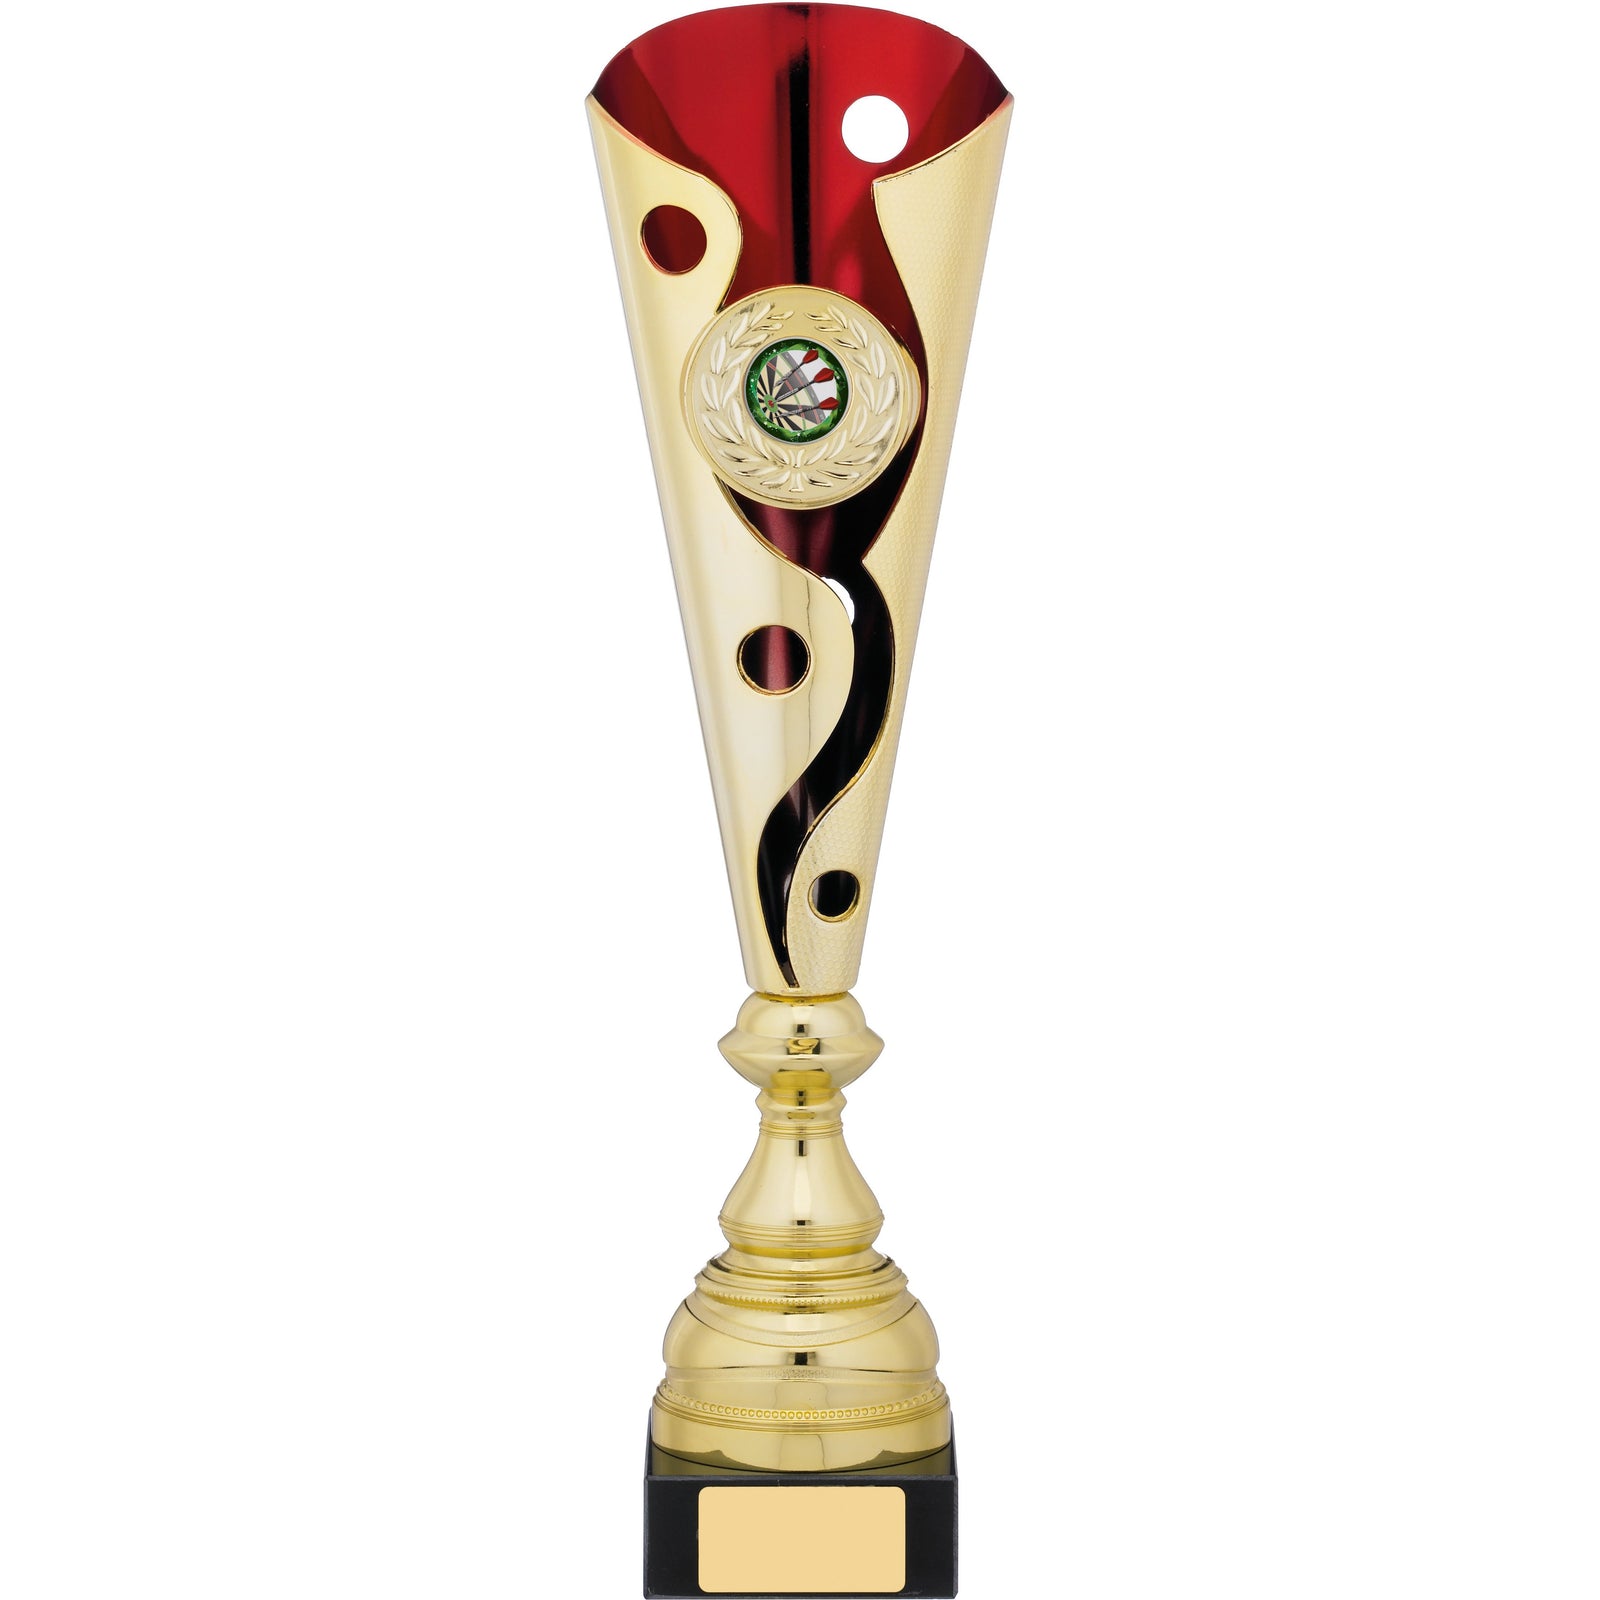 Gold & Red Modern Trophy Cup with Circles and Swirl Cutout